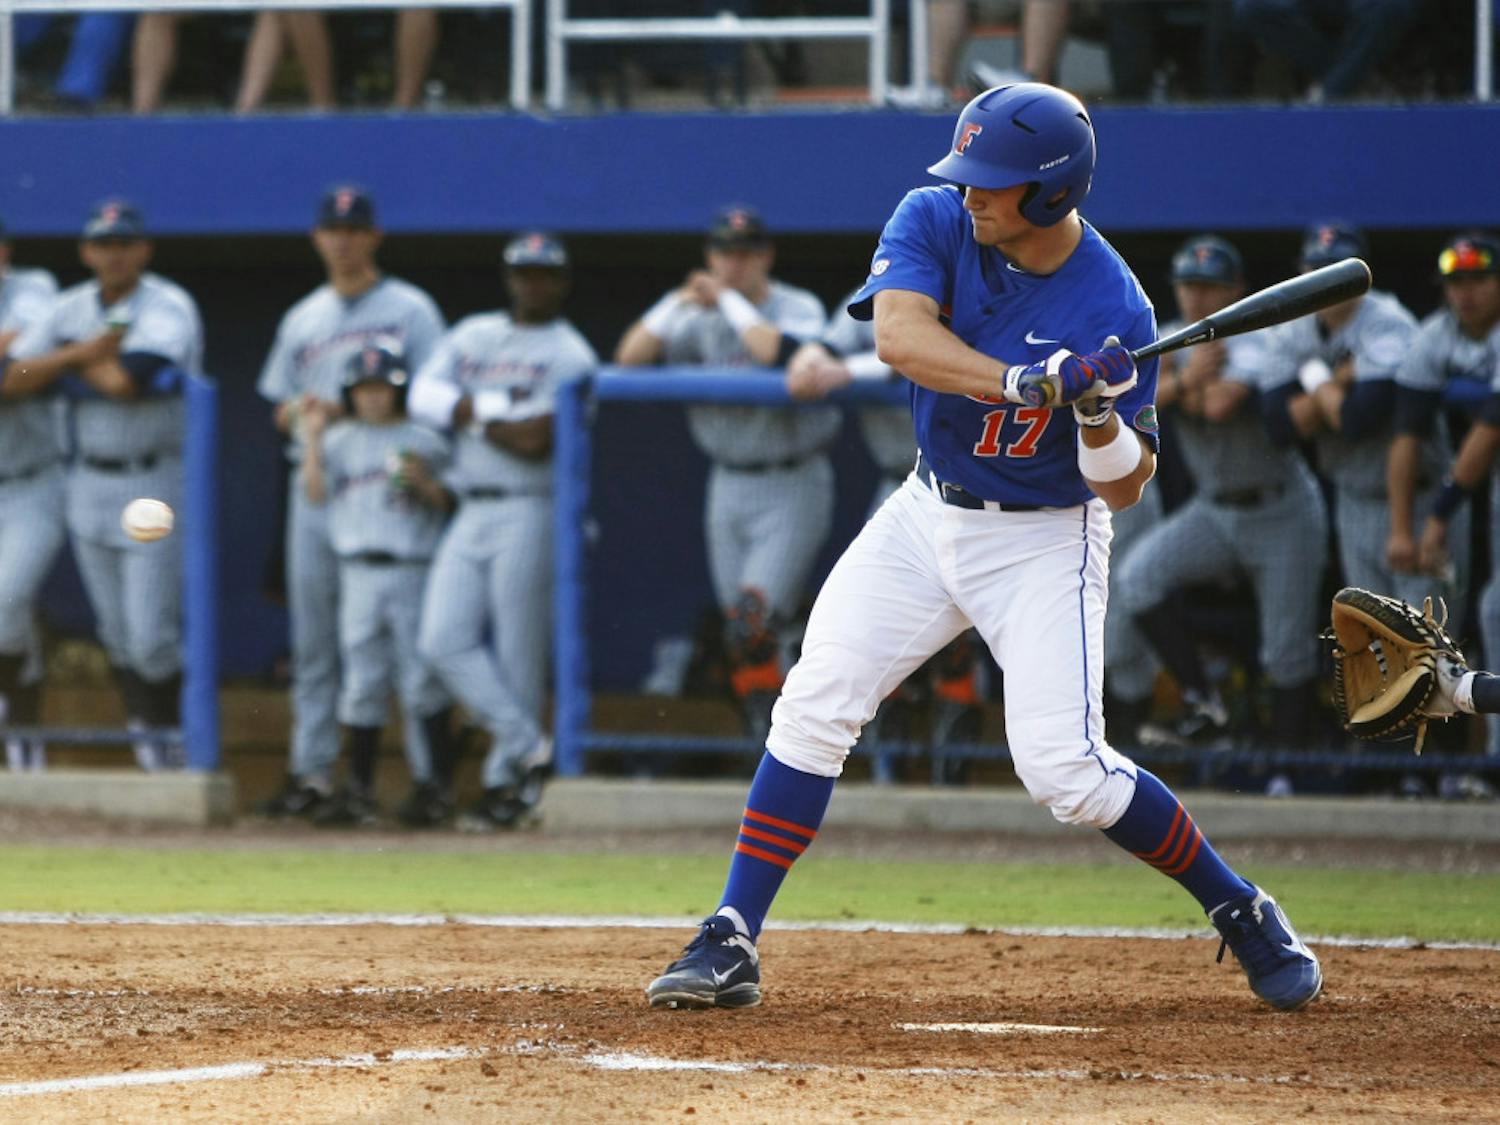 Freshman Taylor Gushue's two-run triple in the bottom of the
fourth inning helped Florida beat Cal State Fullerton, 5-2, on
Saturday at McKethan Stadium. 